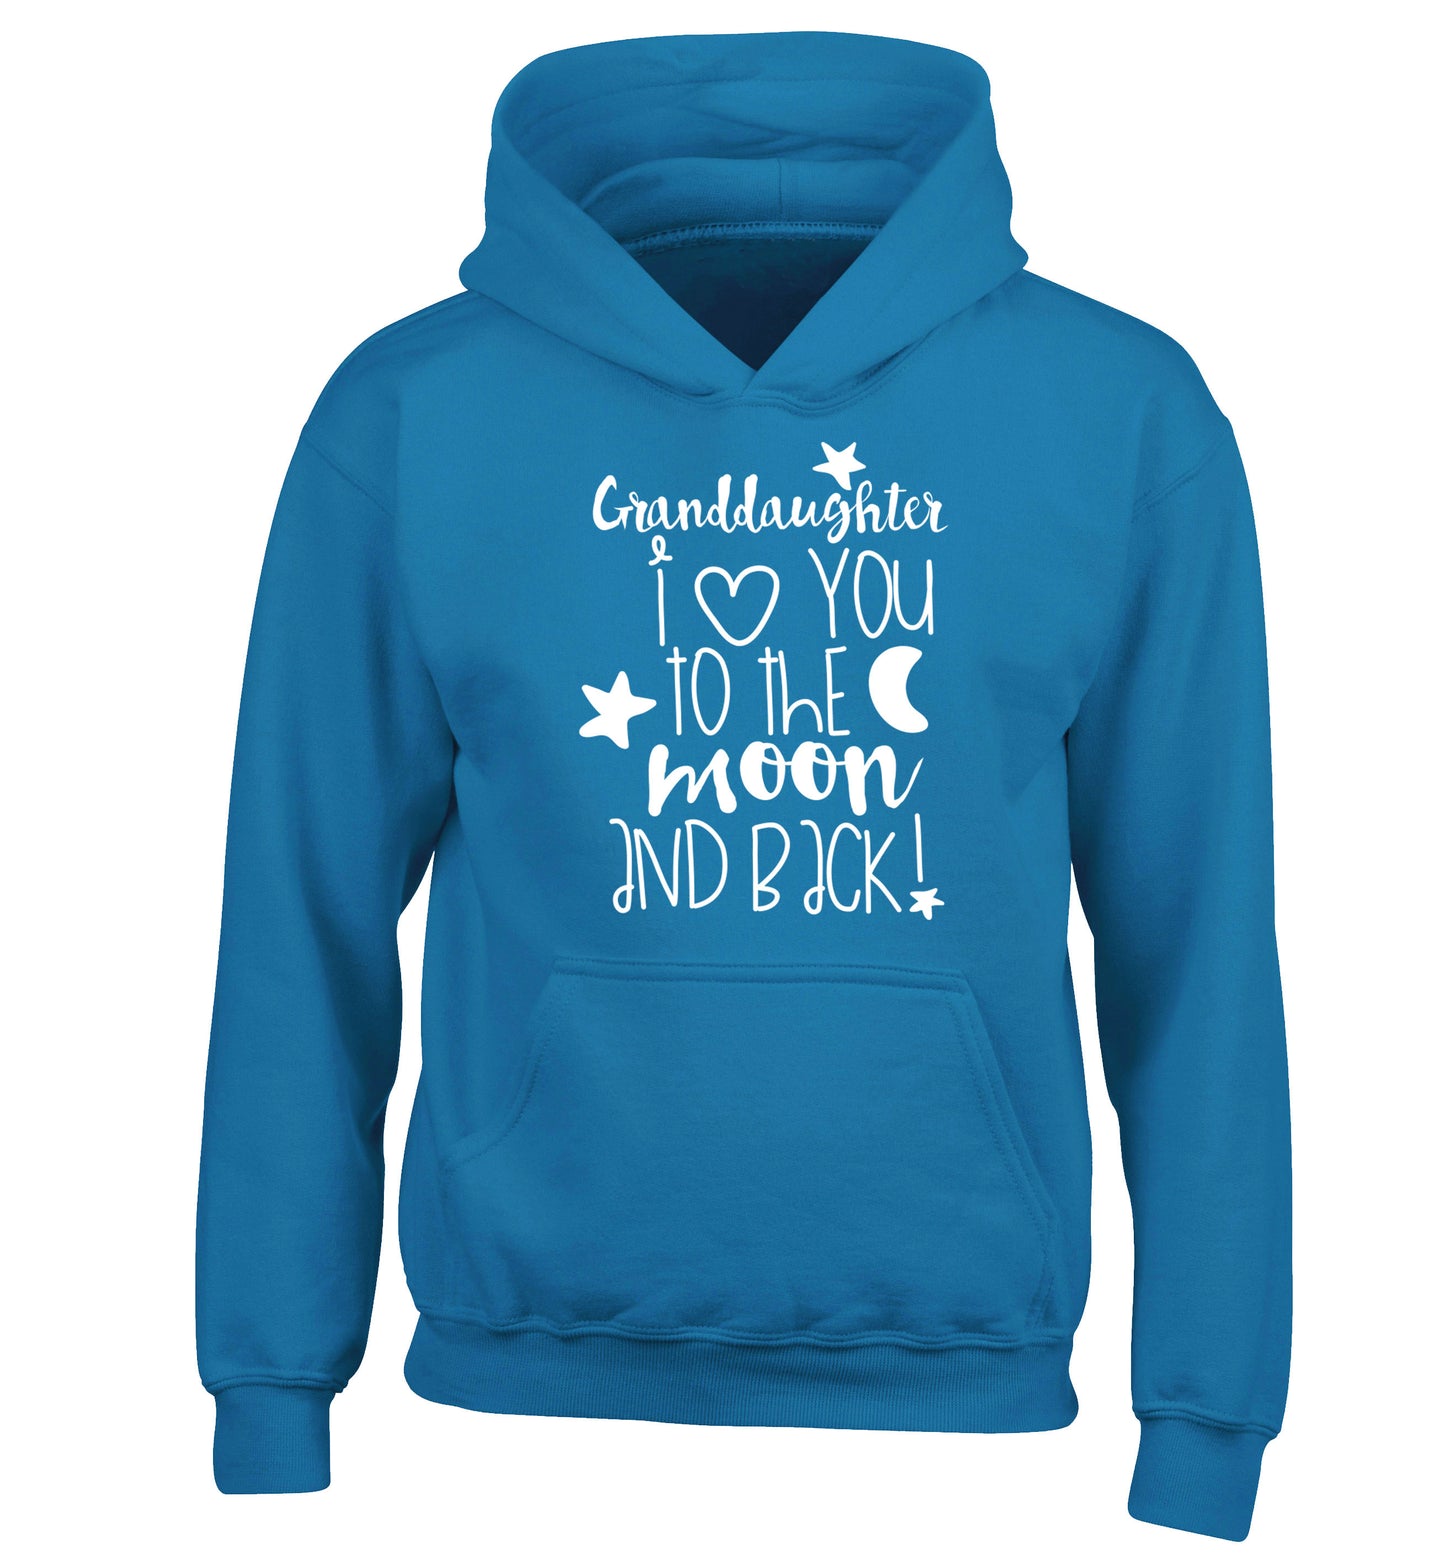 Granddaughter I love you to the moon and back children's blue hoodie 12-14 Years